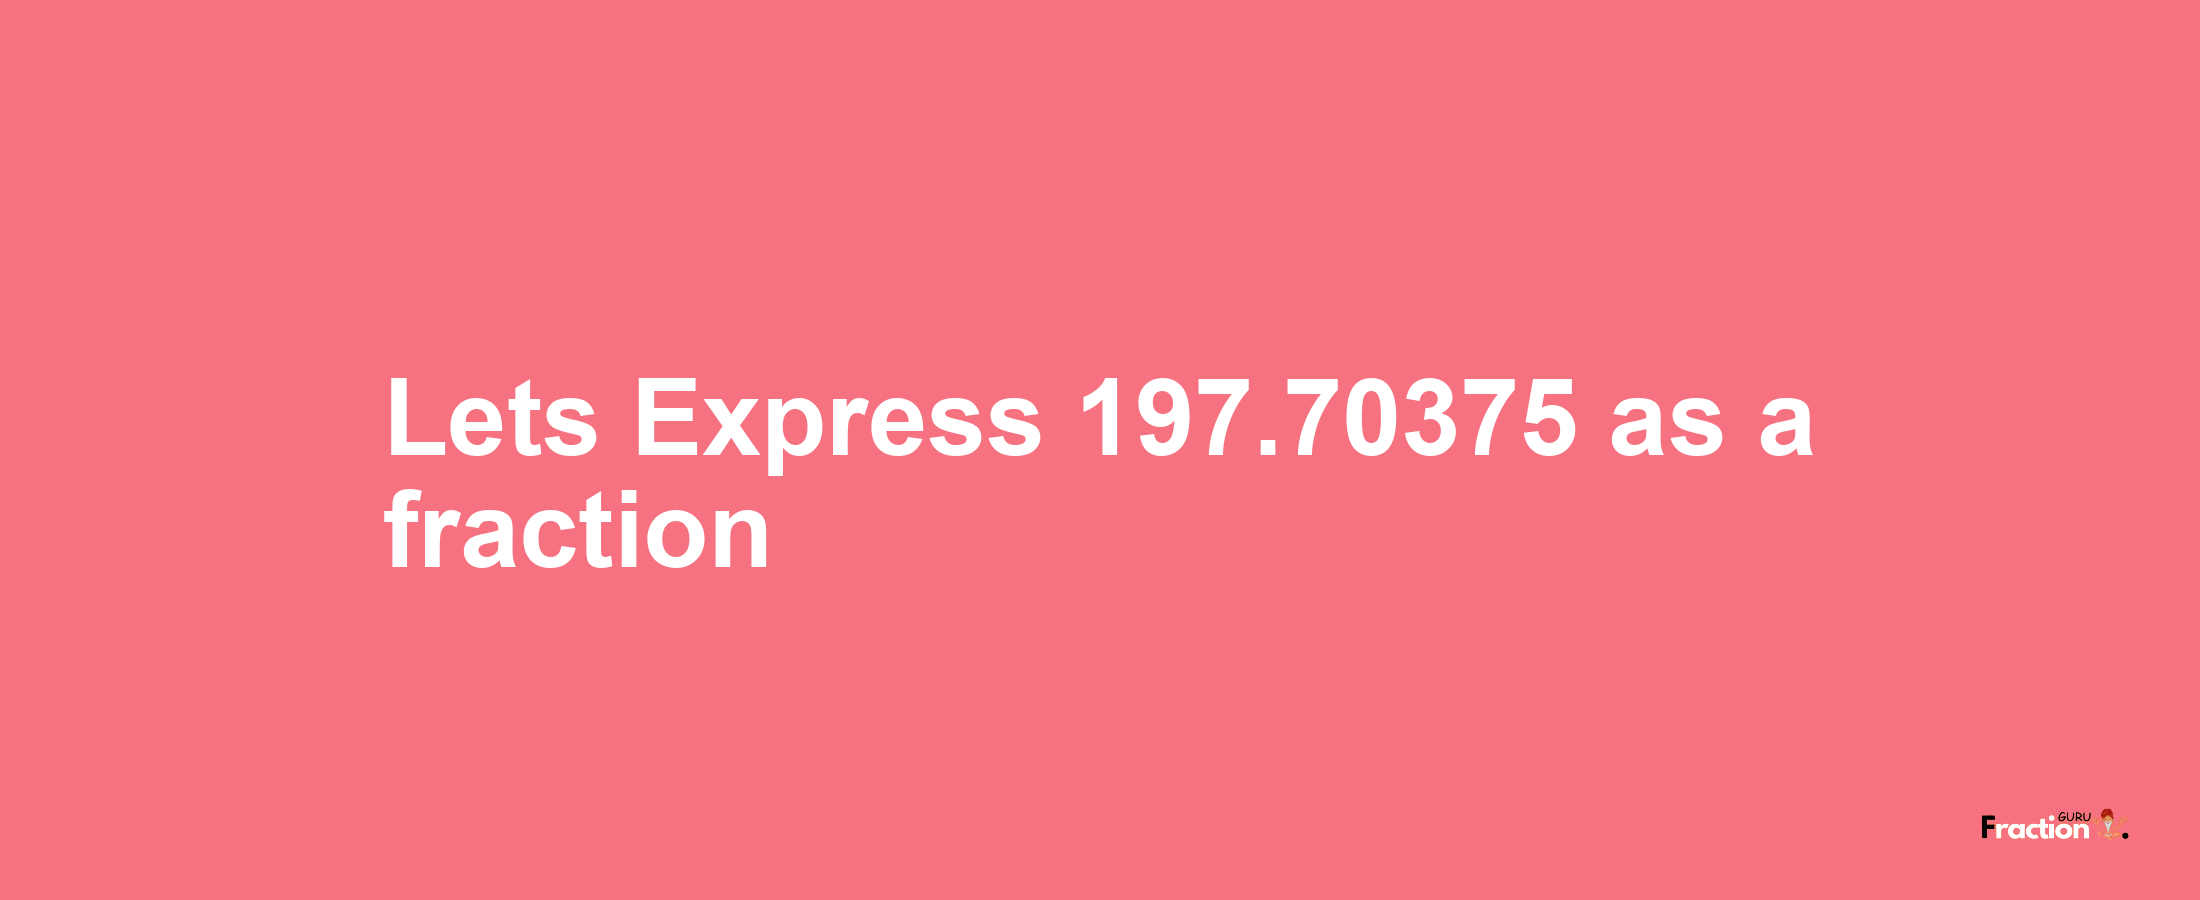 Lets Express 197.70375 as afraction